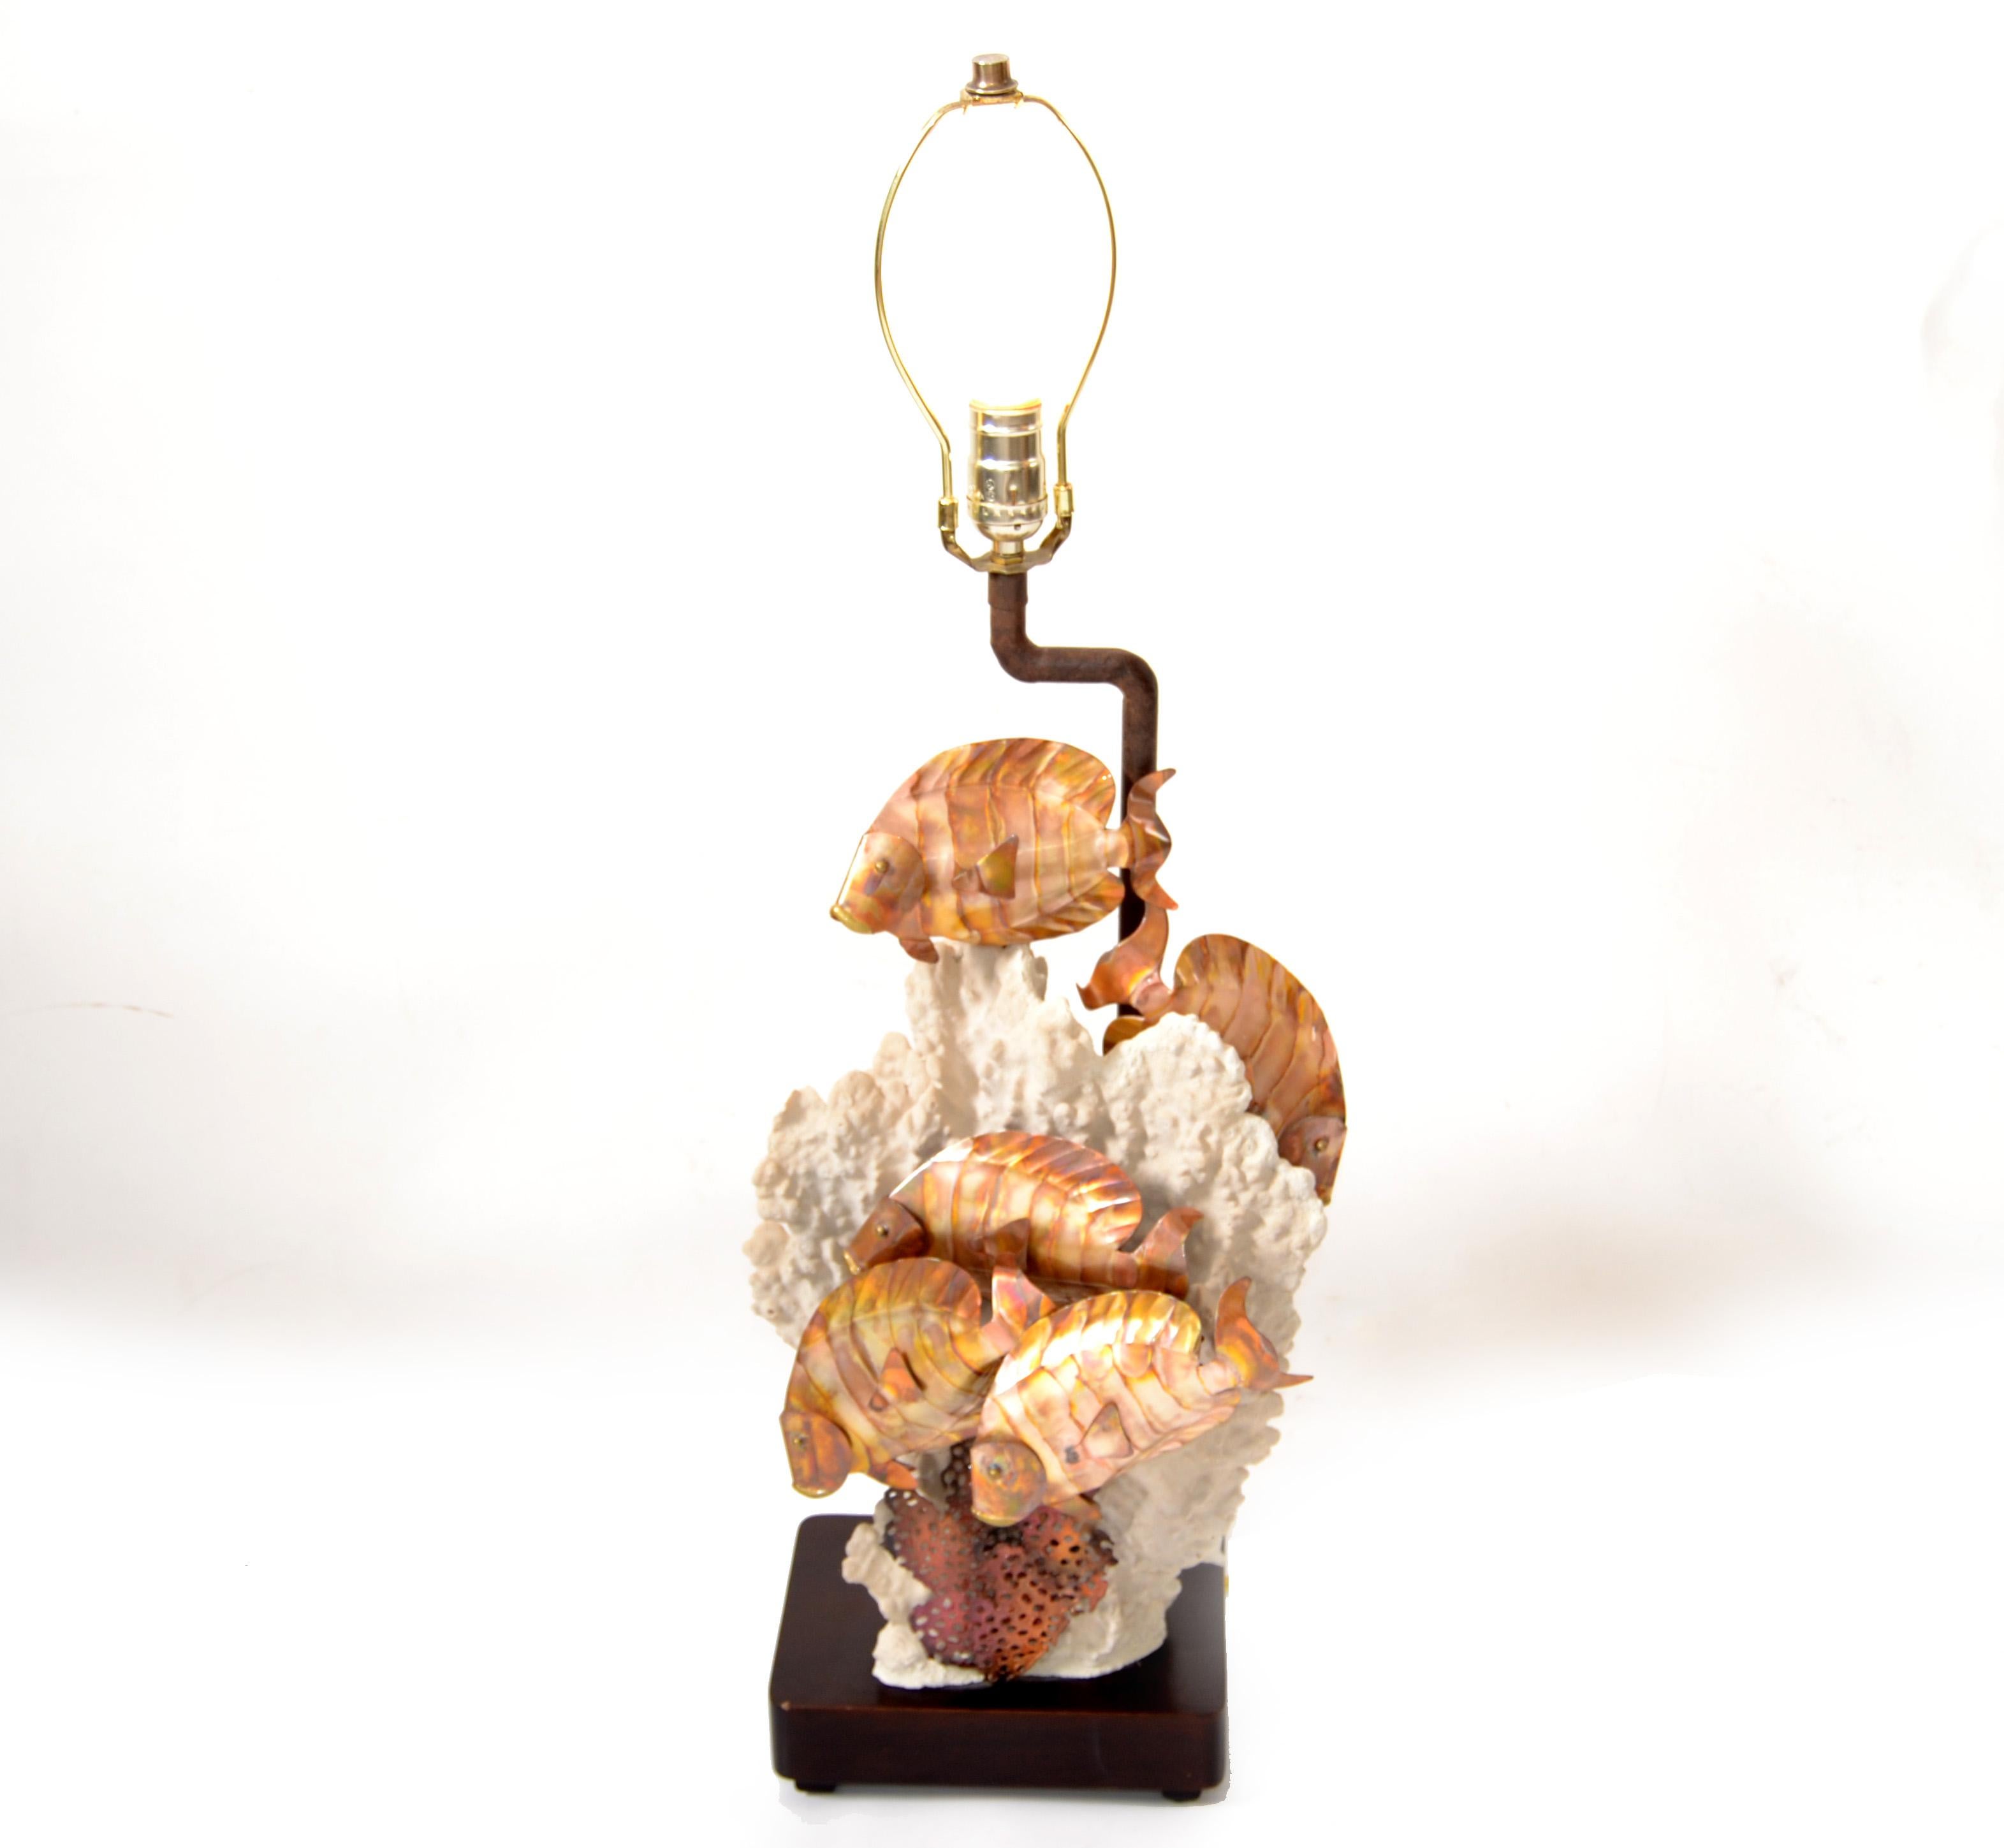 Brutalist Style whimsical nautical Brass Fish on a natural white coral core and mounted on a rectangle Wood Base. 
The Stem is a copper piece of pipe and topped with the socket and harp.
Very detailed and real looking.
Base Measures: 8.5 x 6.5 x